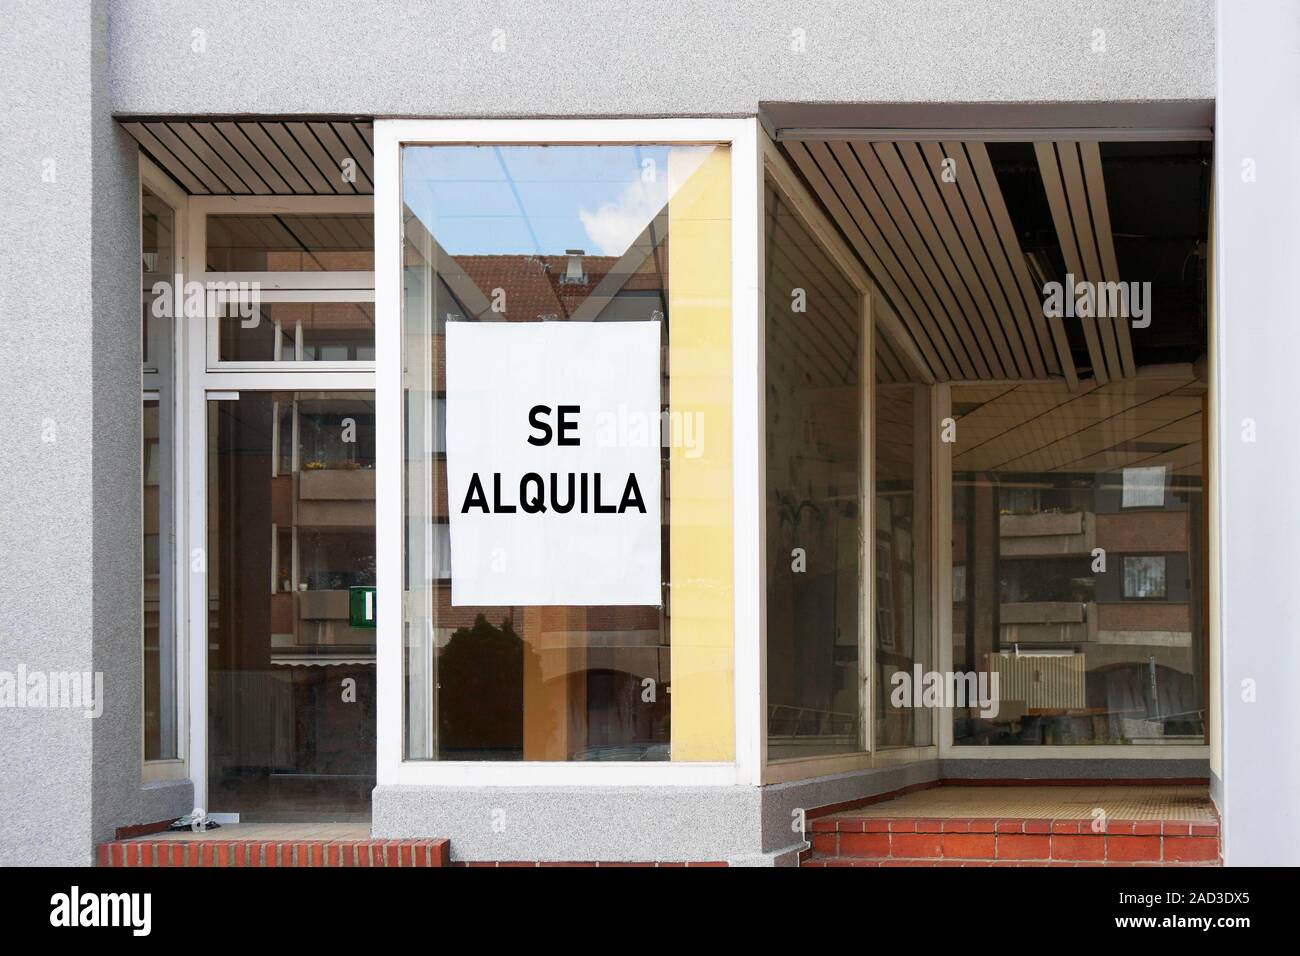 vacancy sign in spanish shop or store window reads se alquila which translates as for rent Stock Photo